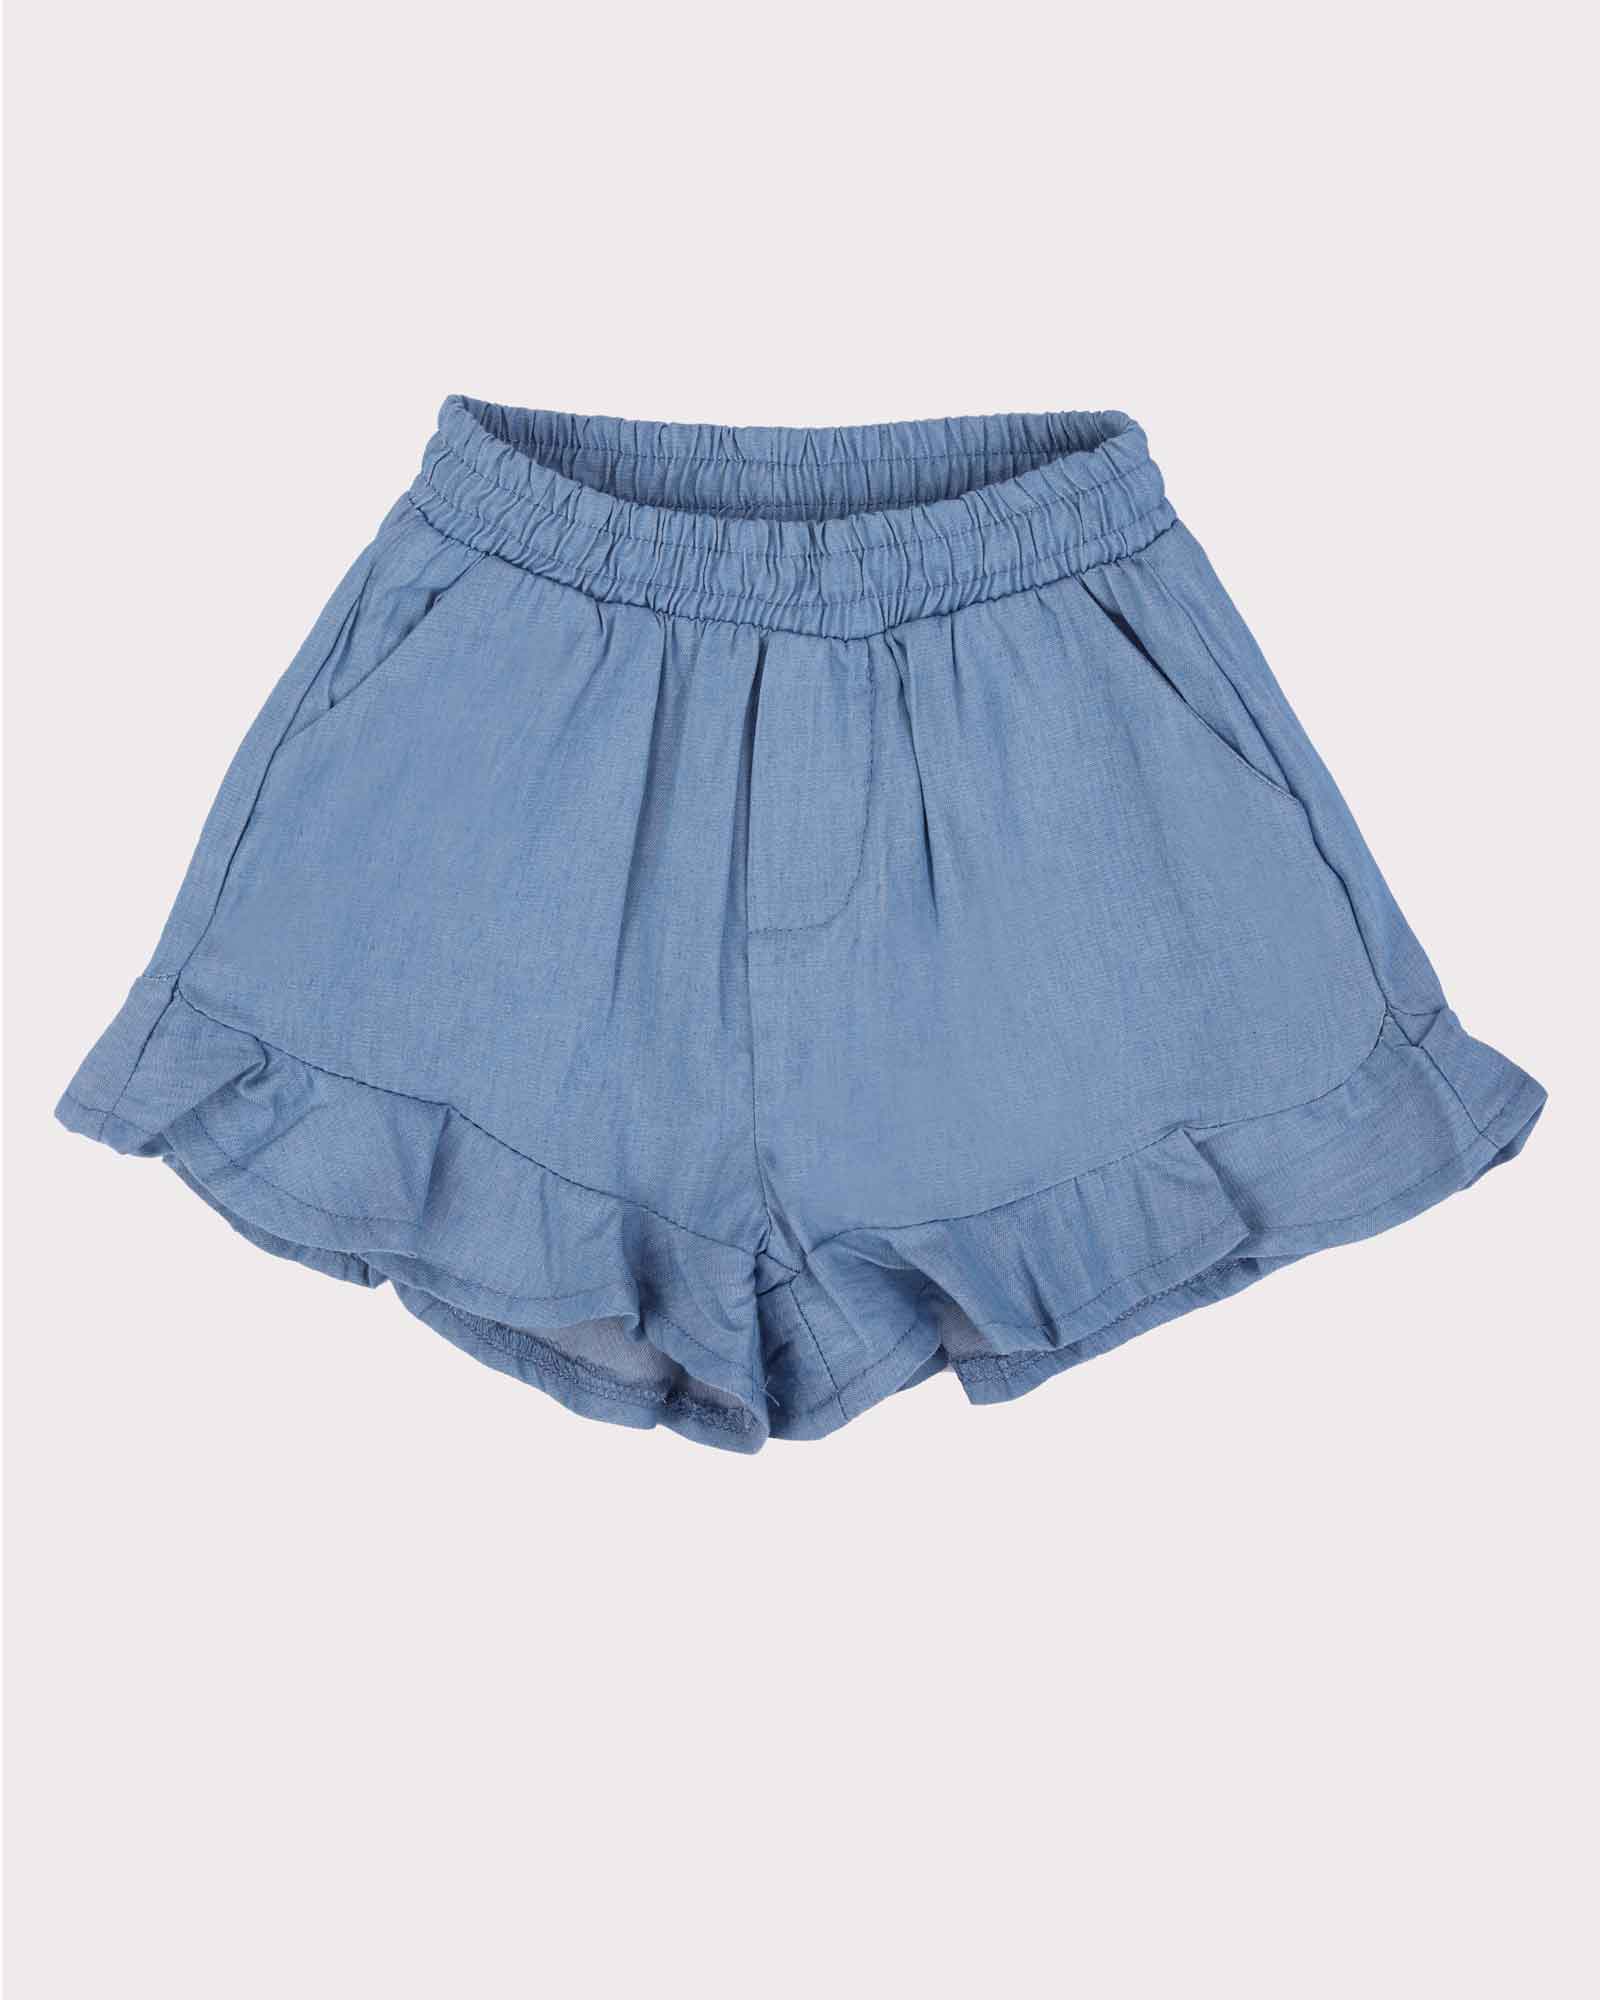 Frill Short in Chambray Front